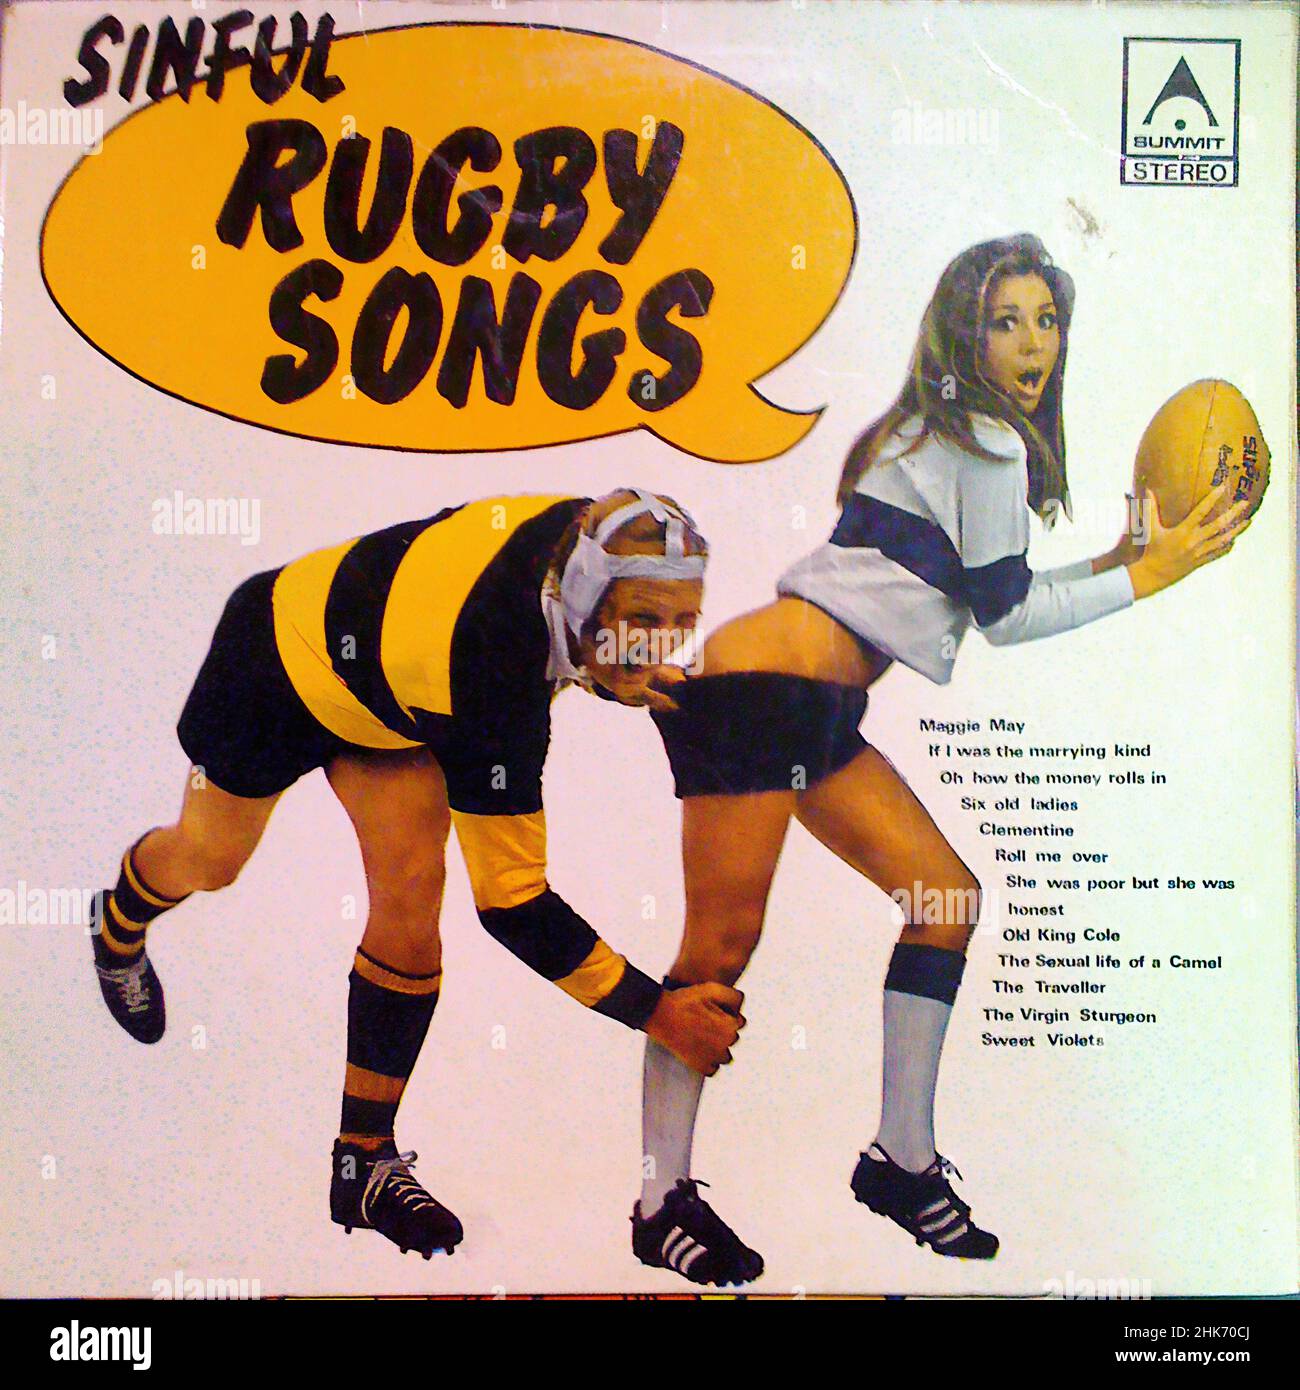 Vintage vinyl record cover -  Sinful Rugby Songs - front Stock Photo